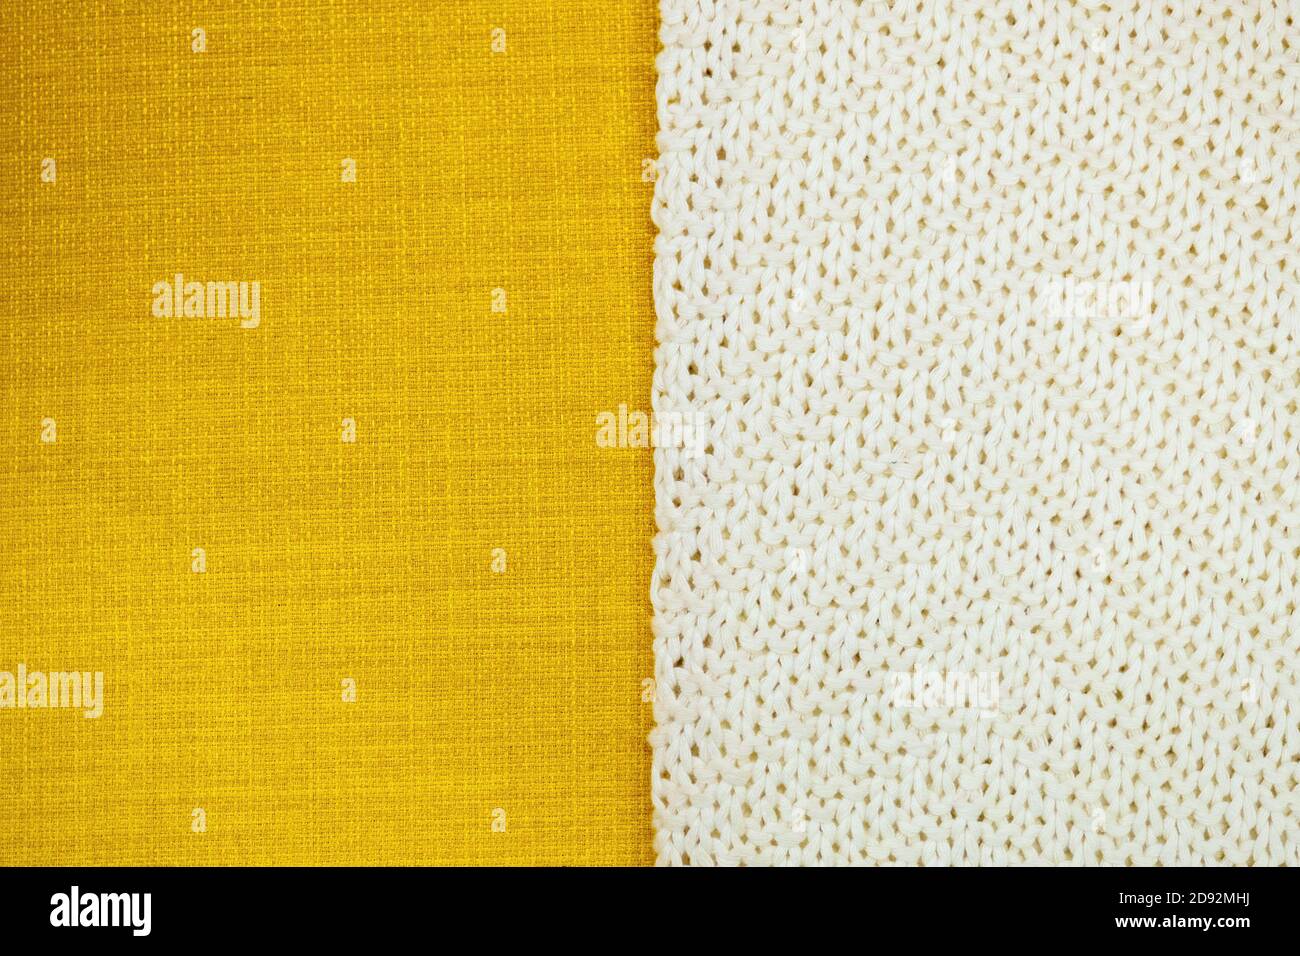 background from two part yellow textile and white knitting cloth, copy space. Stock Photo